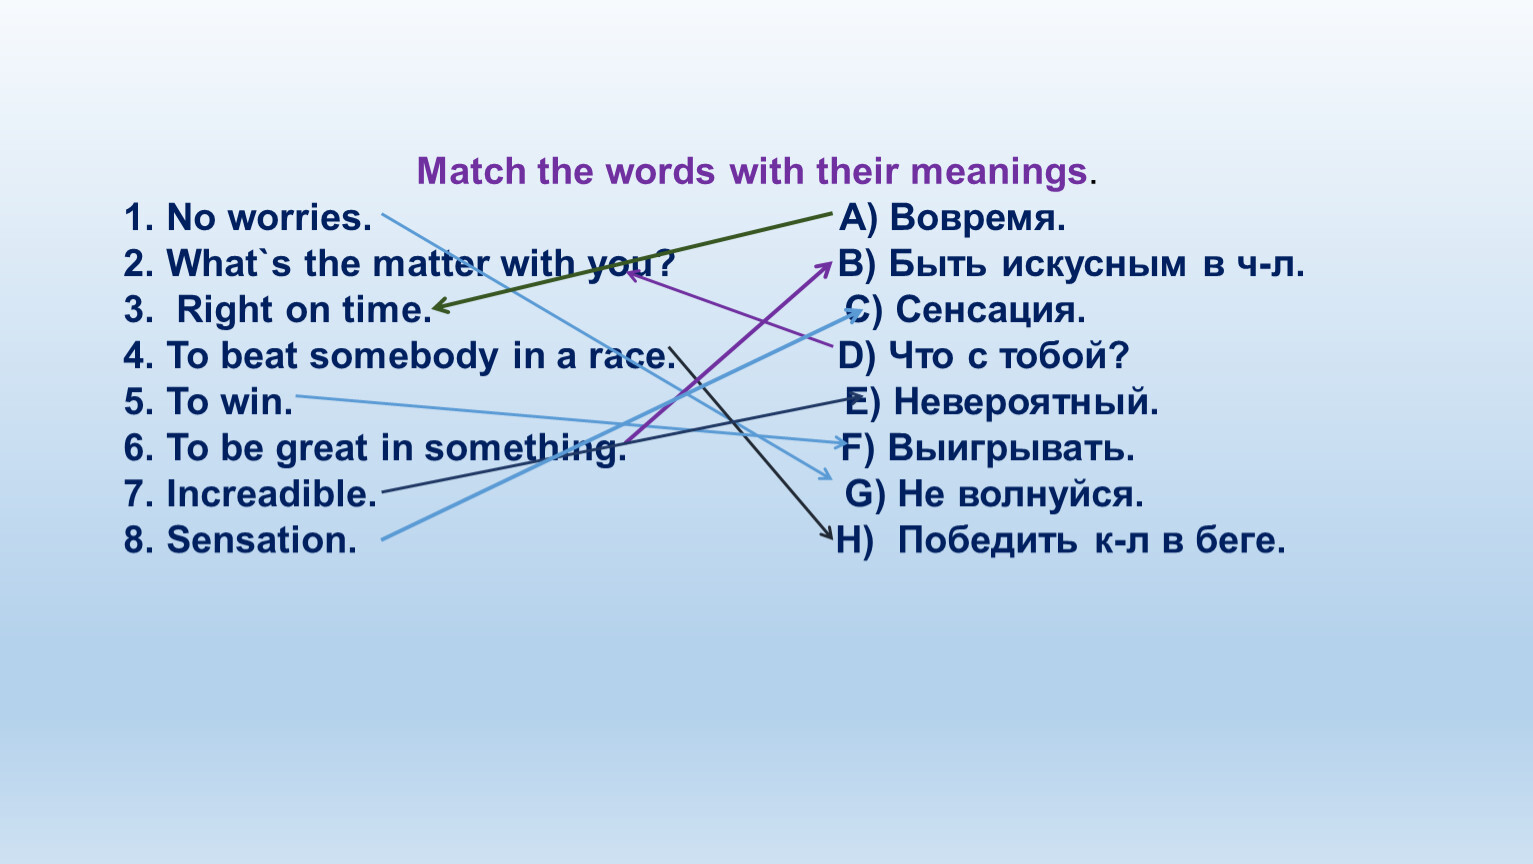 Match the phrases in bold